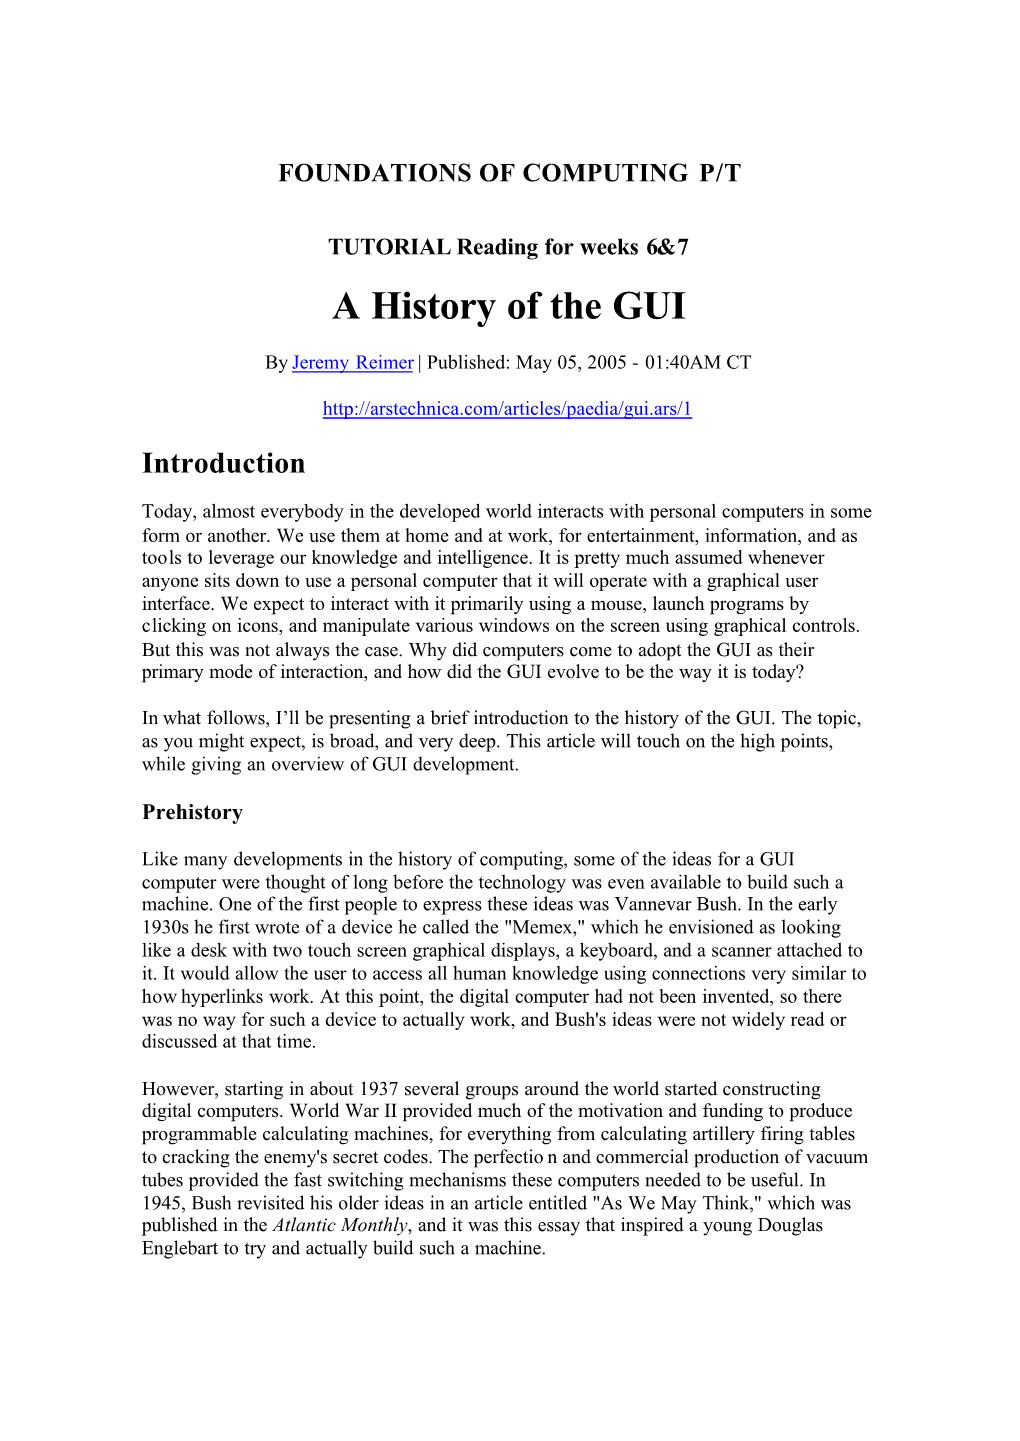 A History of the GUI